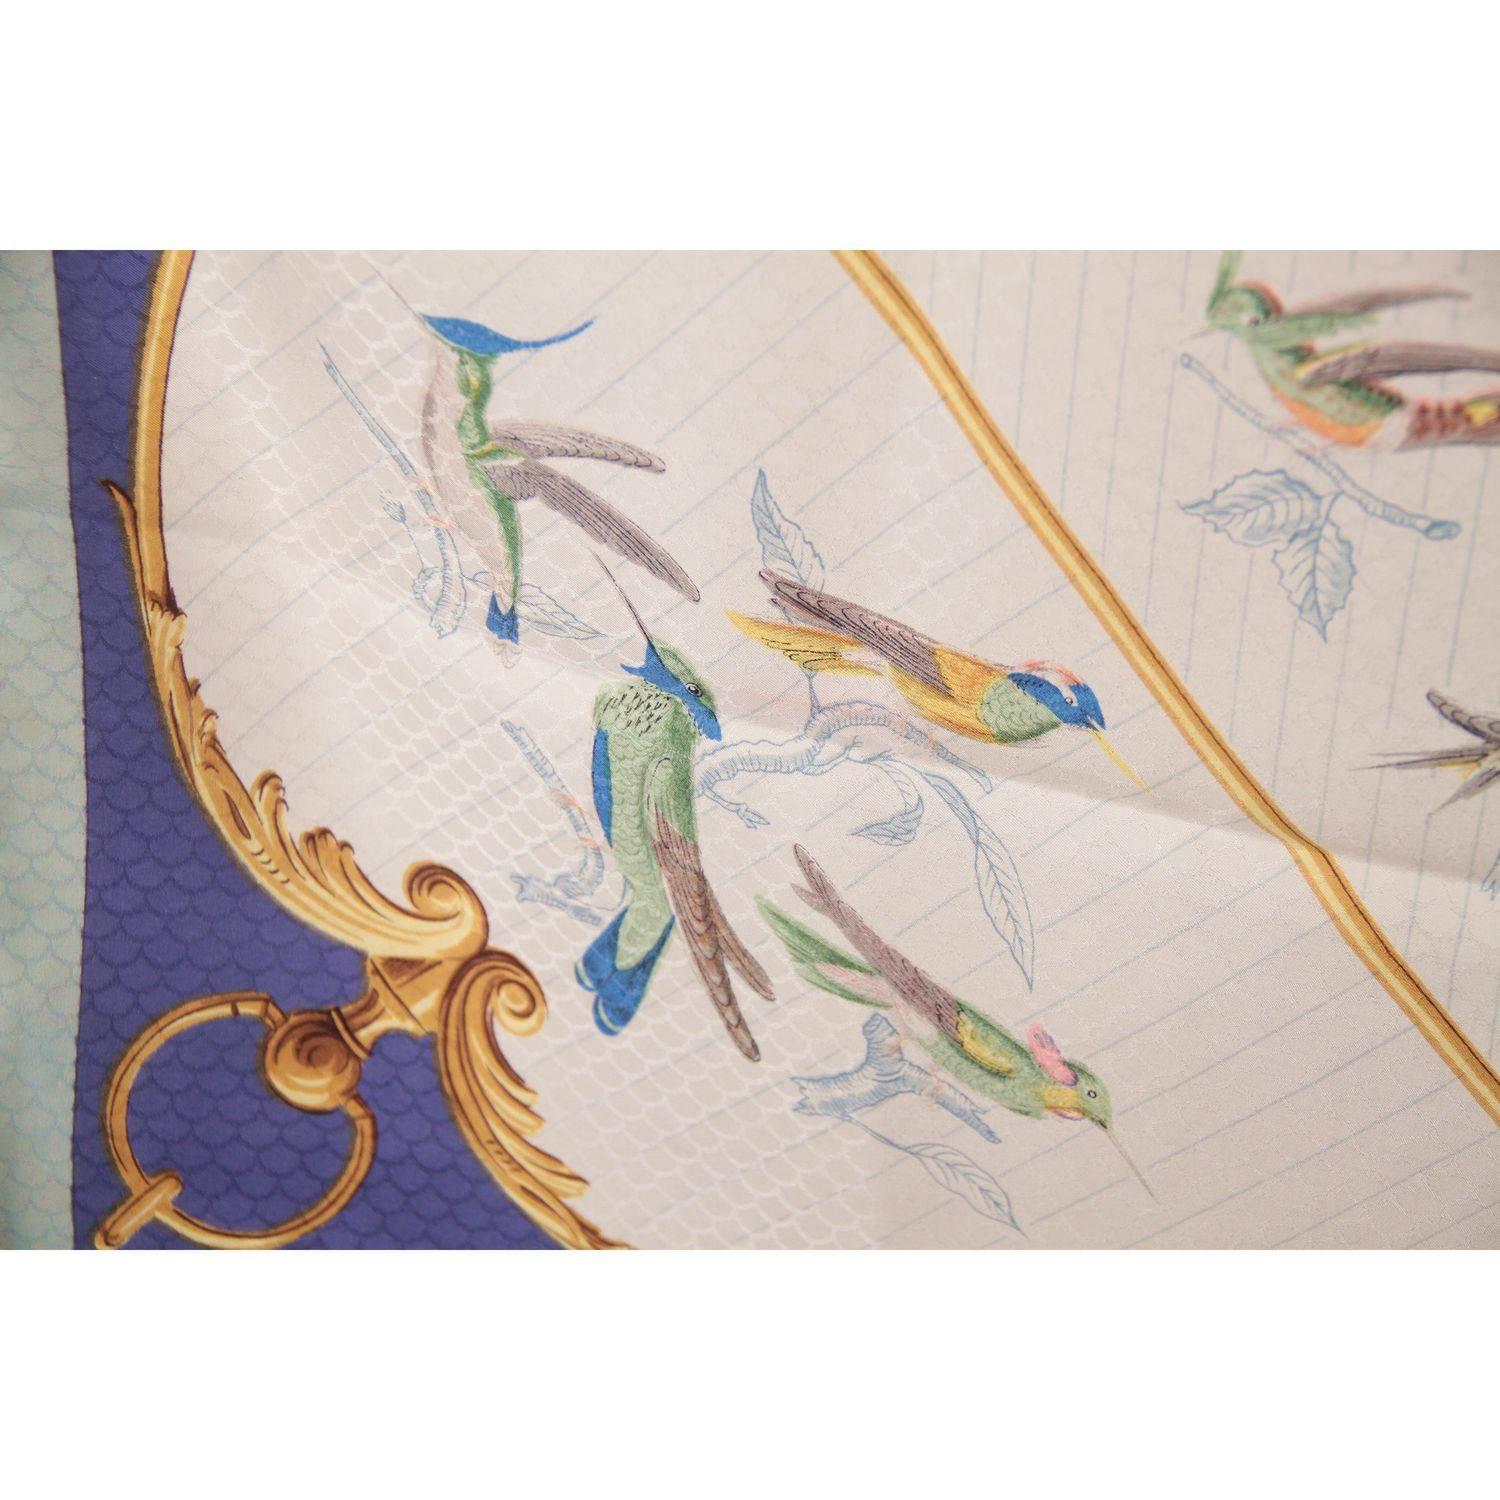 - Title: La Voliere des Dames, by Hugo Grygkar and first issued in 1958
- 100% Jacquard Silk
- Jacquard silk ground and birds scenic print
- Approx. Measurements: 35 x 35 inches - 89 x 89 cm
- 'Hermes Paris' printed in the center

MATERIAL:

100%